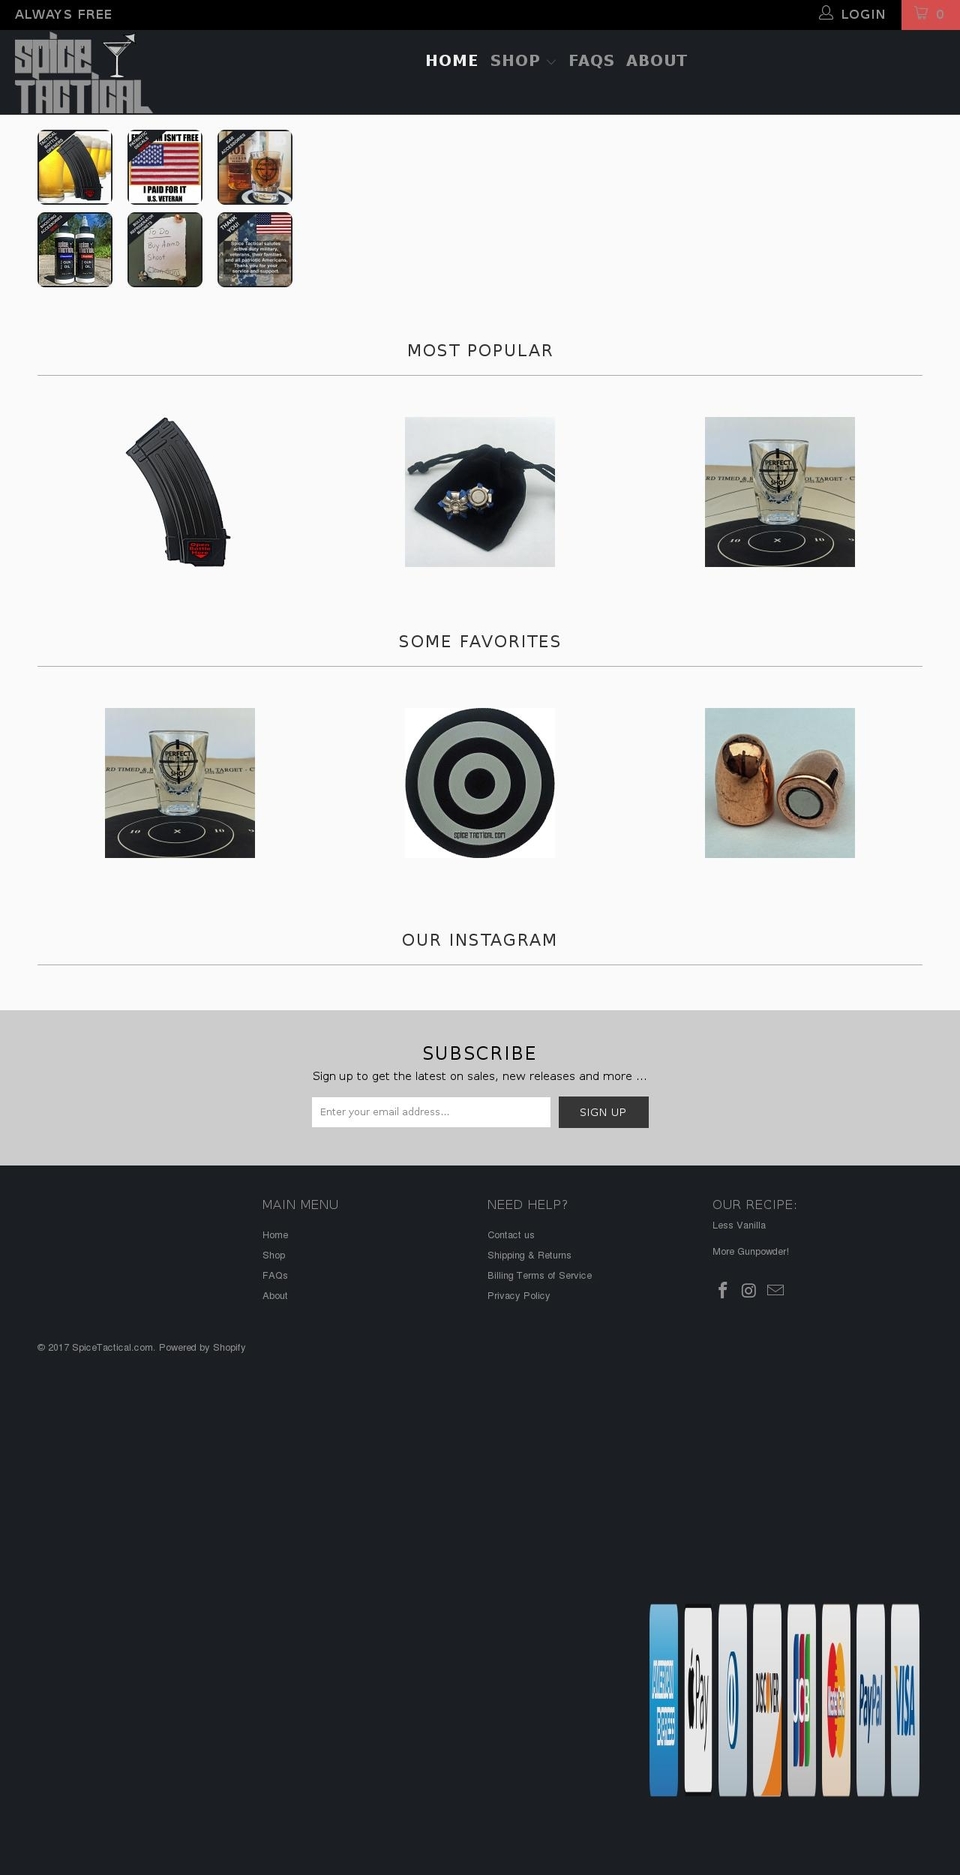 turbo 207 Live on 170331 Shopify theme site example tacticalspice.com